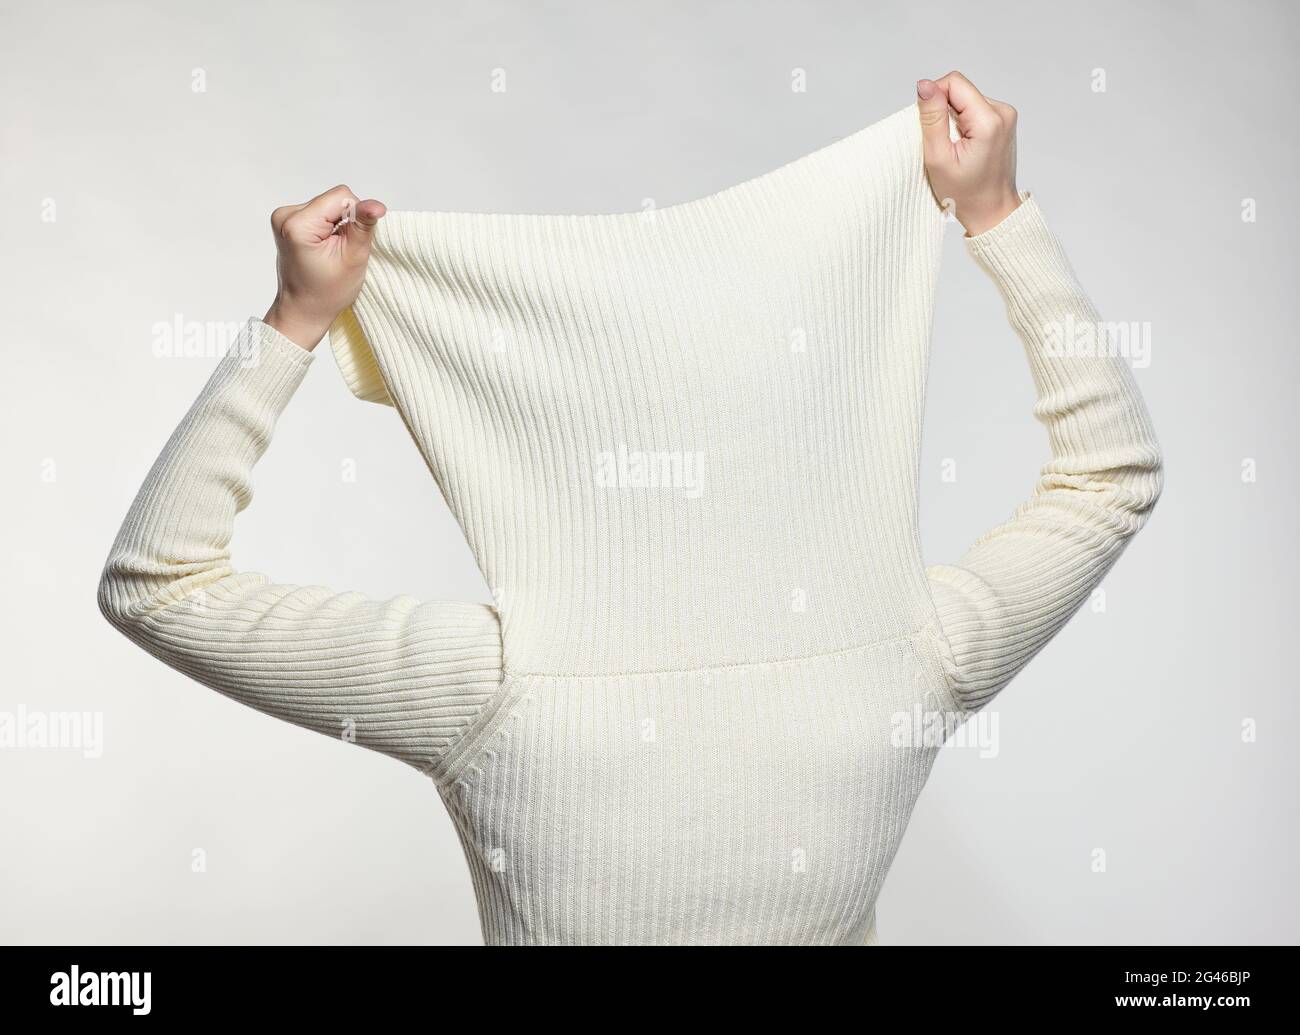 Female with hands on sweater collar hide face Stock Photo - Alamy